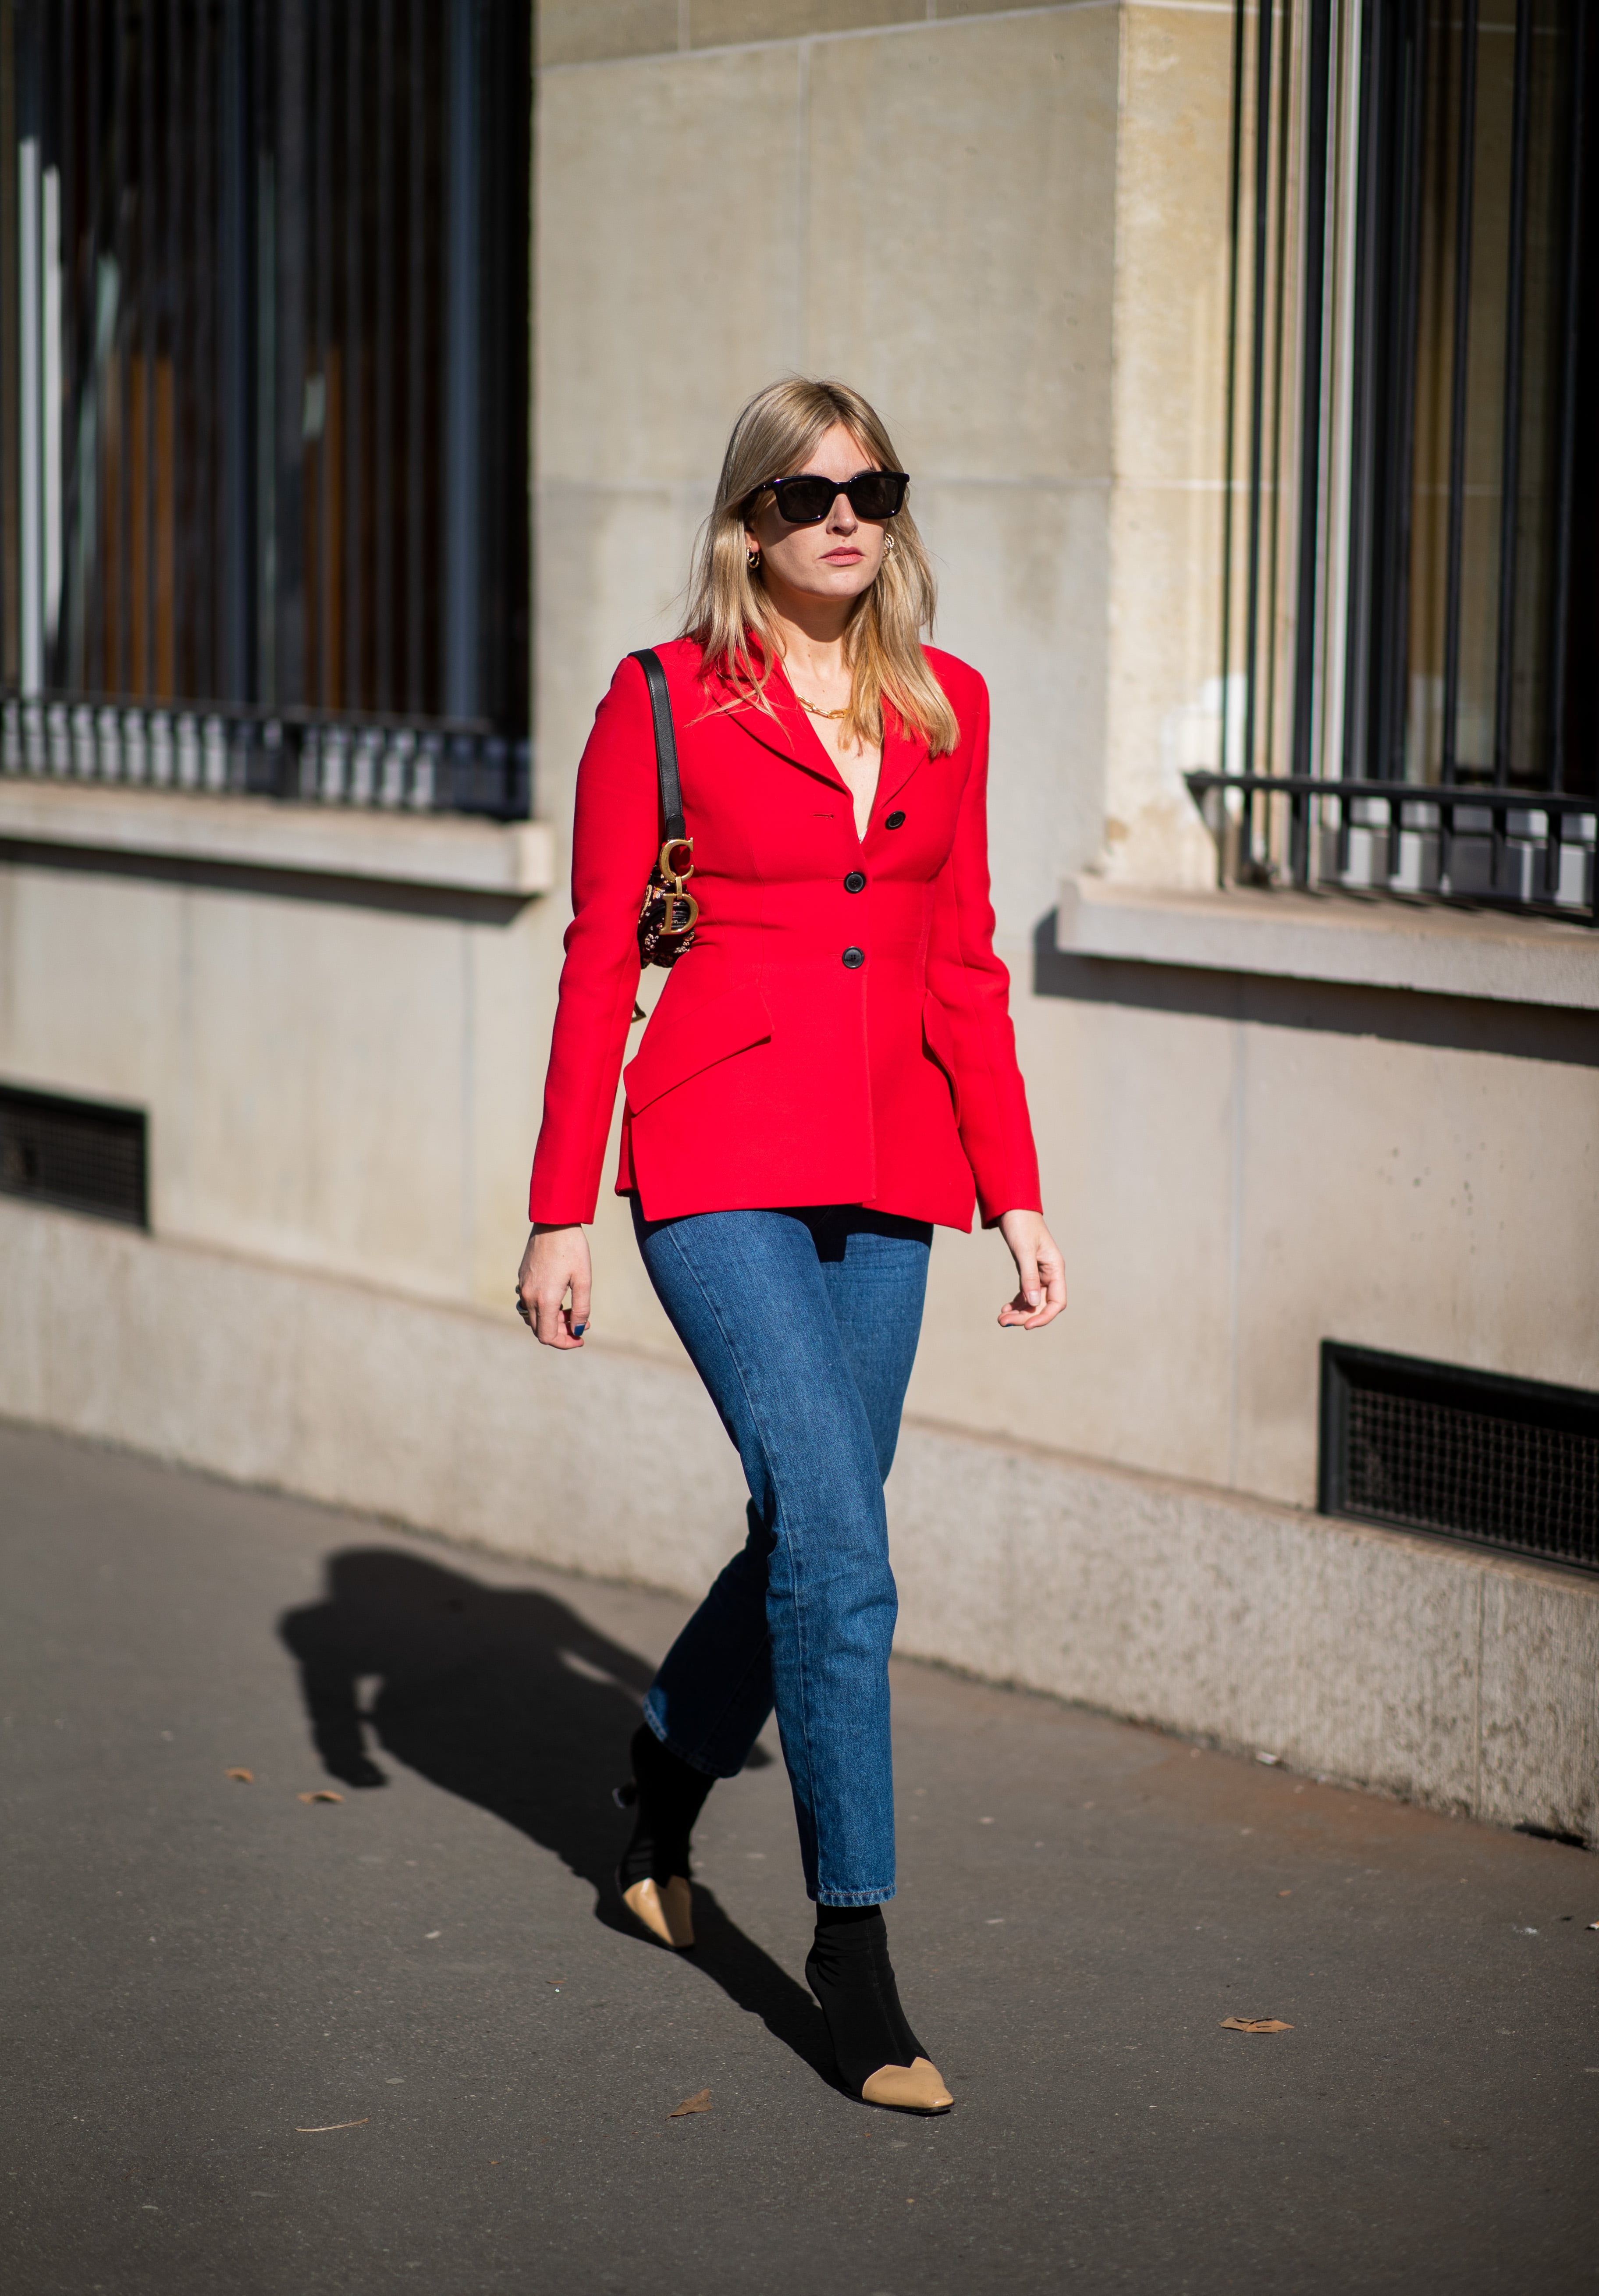 Red Blazer with Blue Jeans Outfits For Women (12 ideas & outfits)